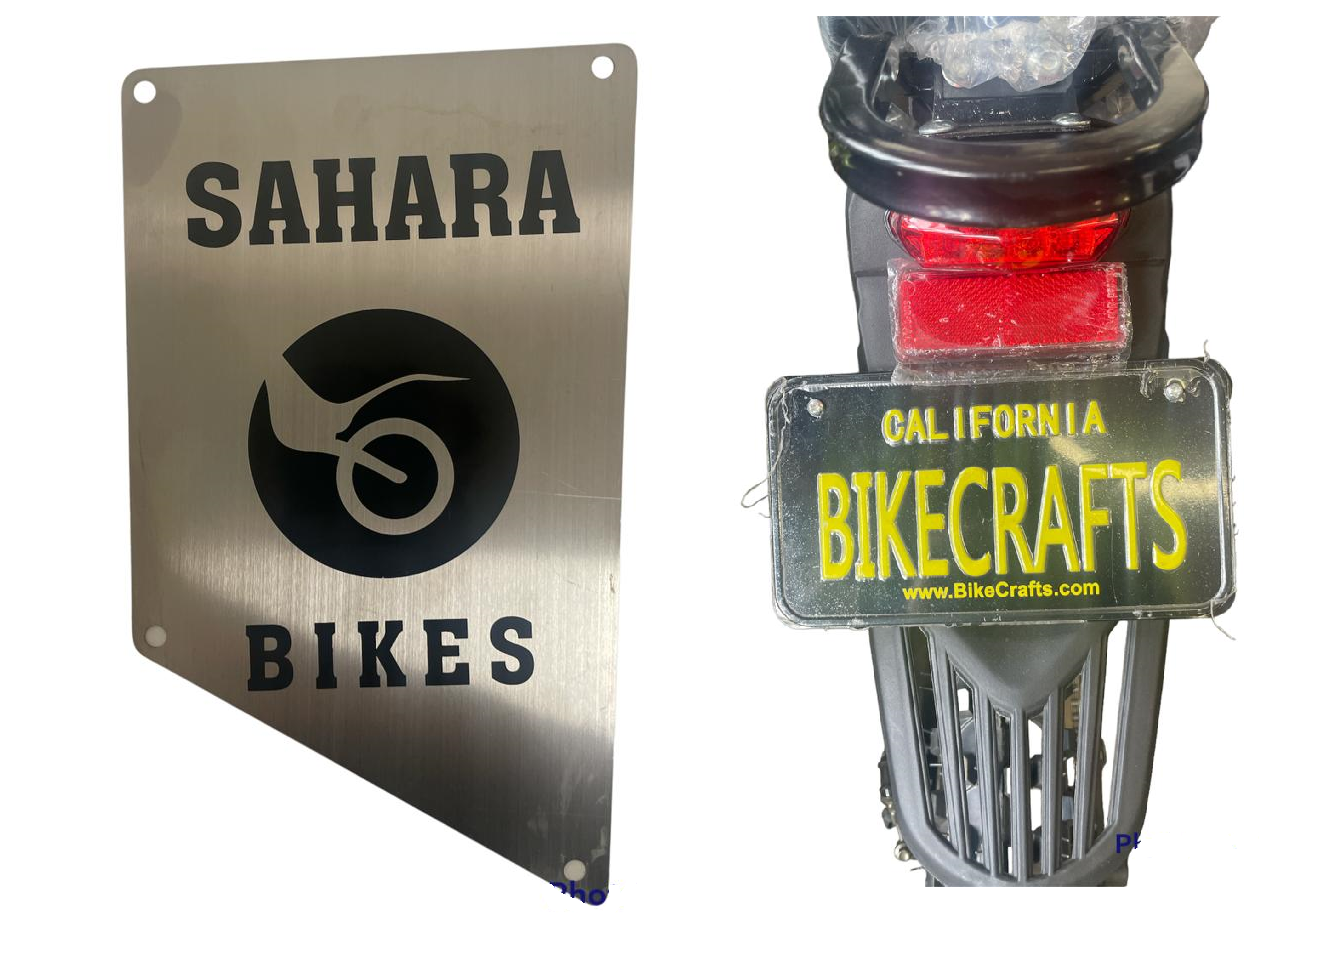 Exploring the Thrill of High-Powered Electric Off-Road Bikes. (Bikecrafts & Sahara Bikes Merger)